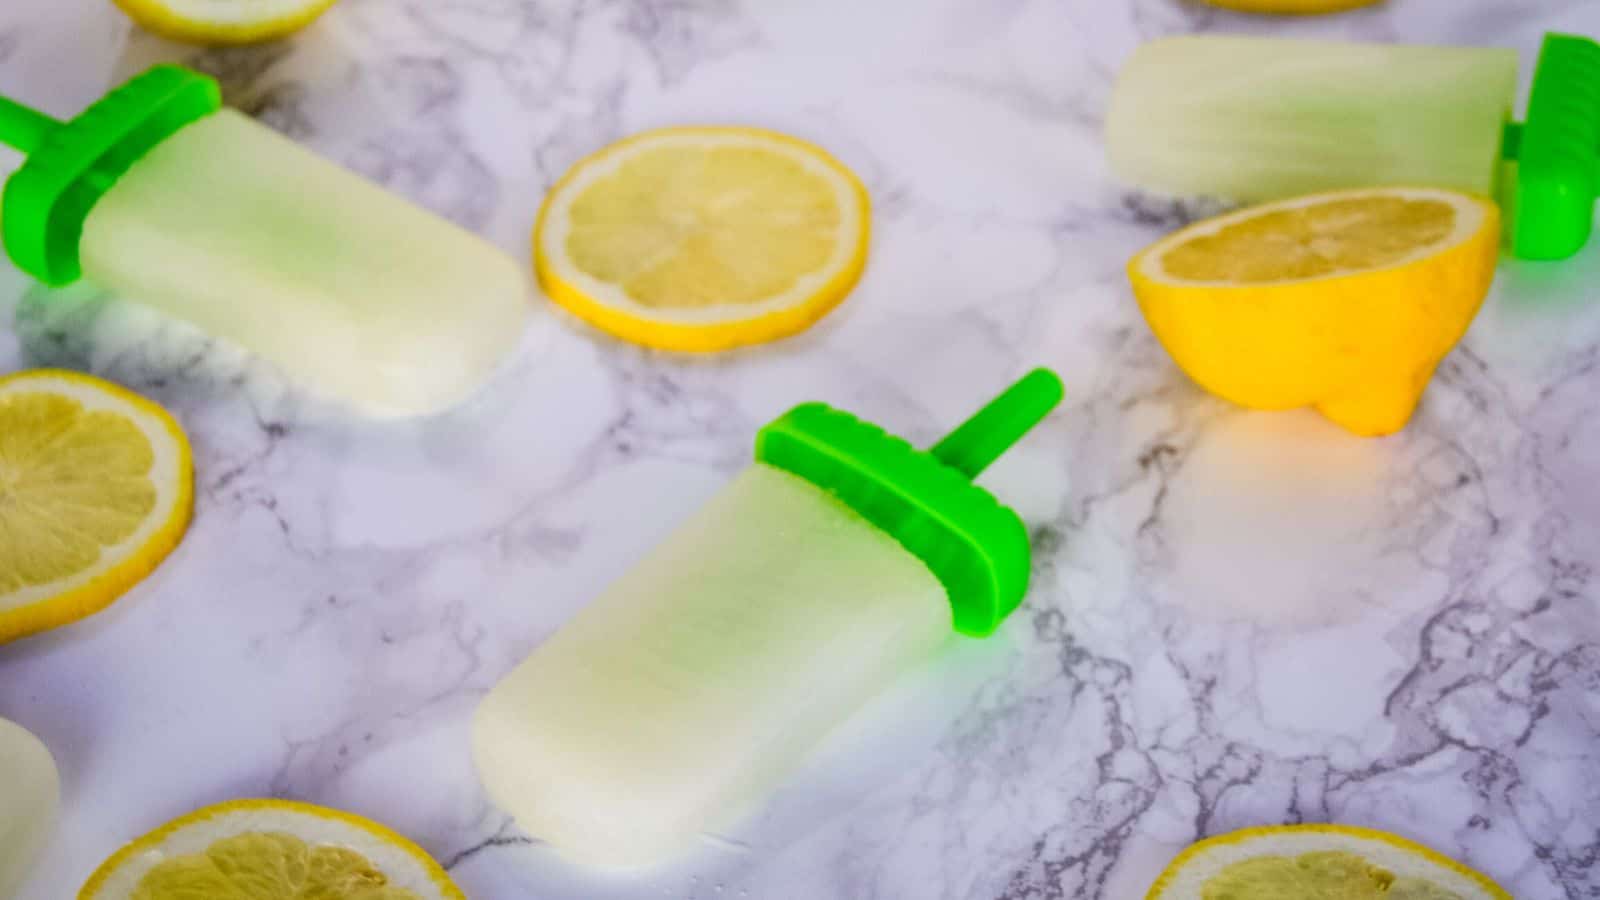 Spiked lemonade popsicles on a marble background next to lemons.